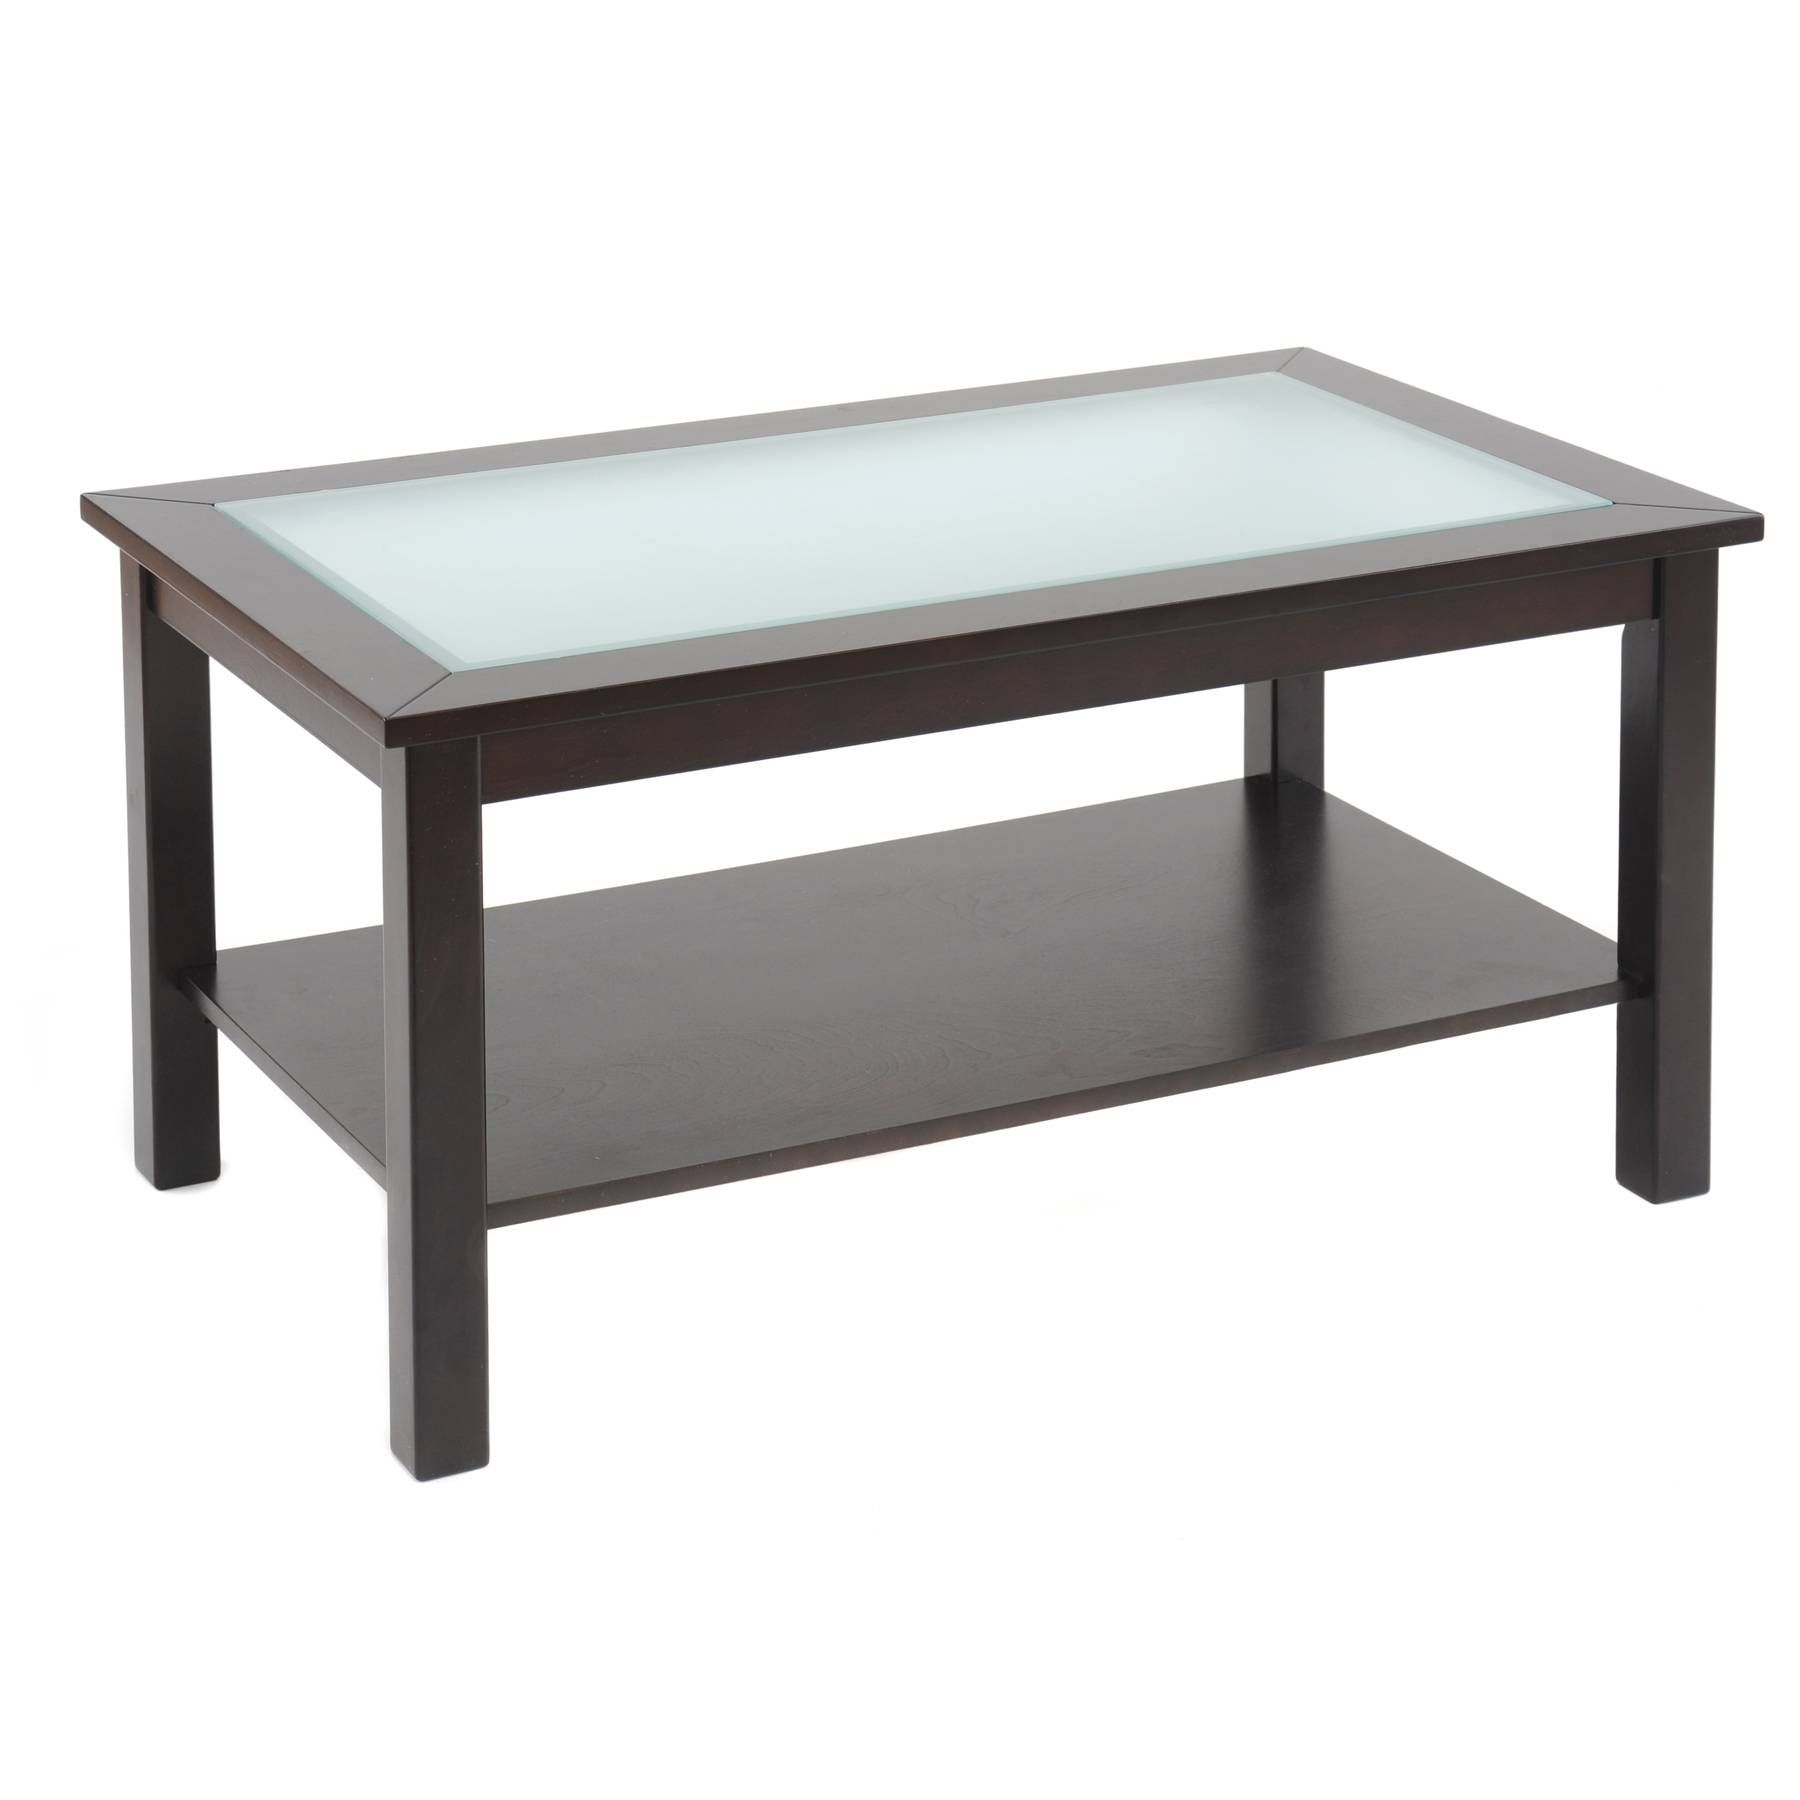 Collection In Round Coffee Table Metal With Coffee Table Awesome For Glass Coffee Tables (View 9 of 24)